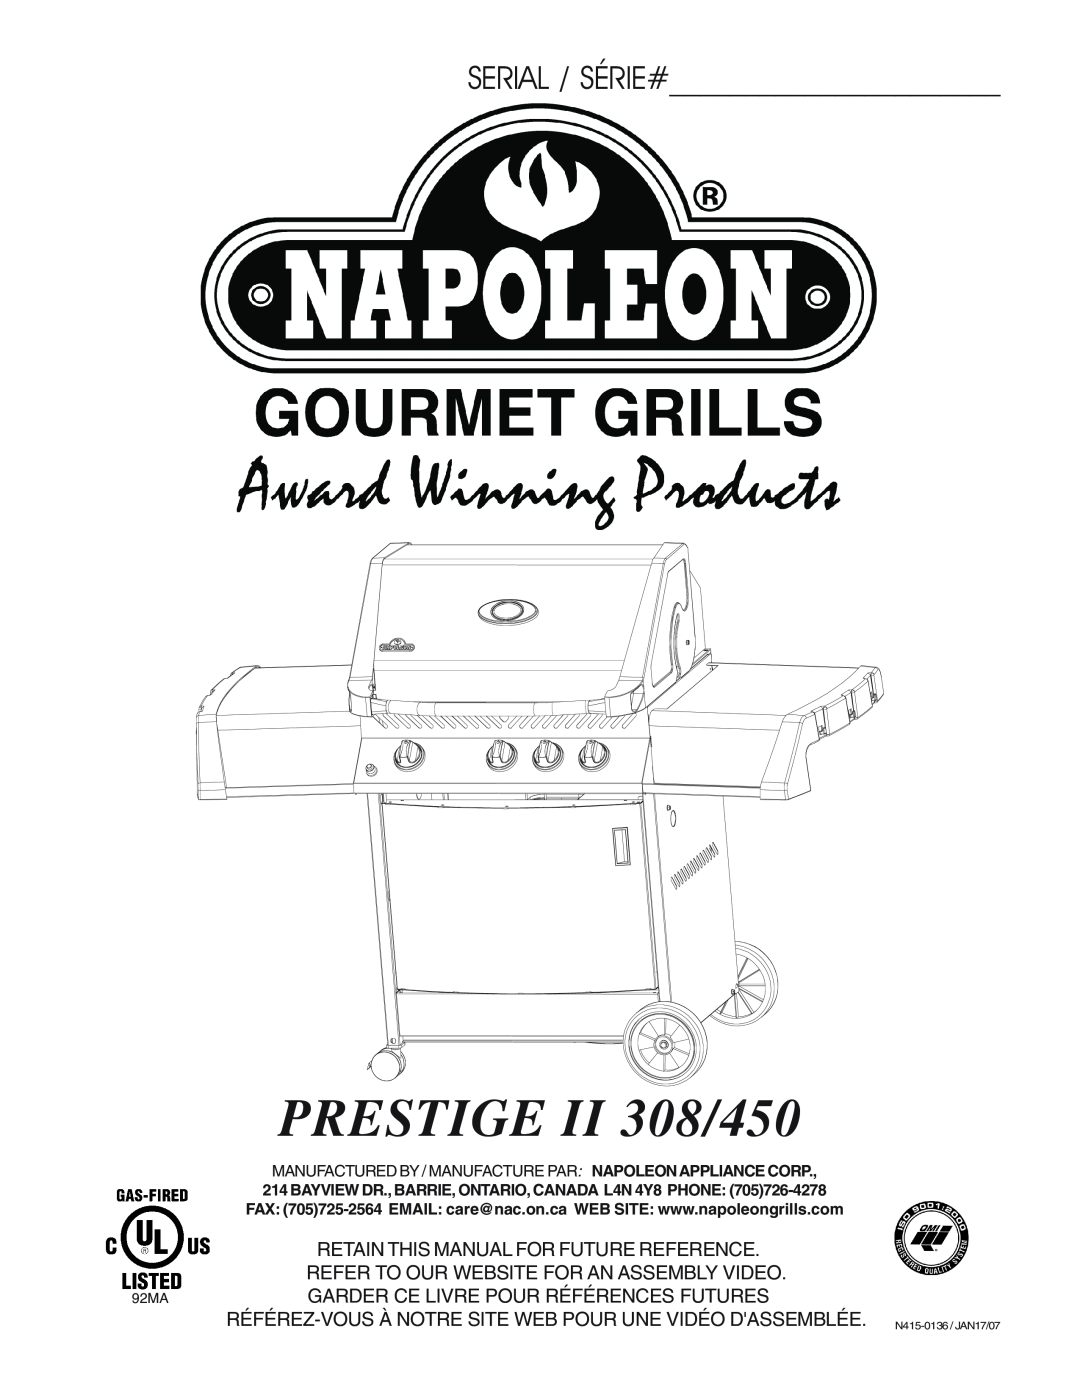 Napoleon Grills manual Serial / Série#, Retain This Manual For Future Reference, PRESTIGE II 308/450 